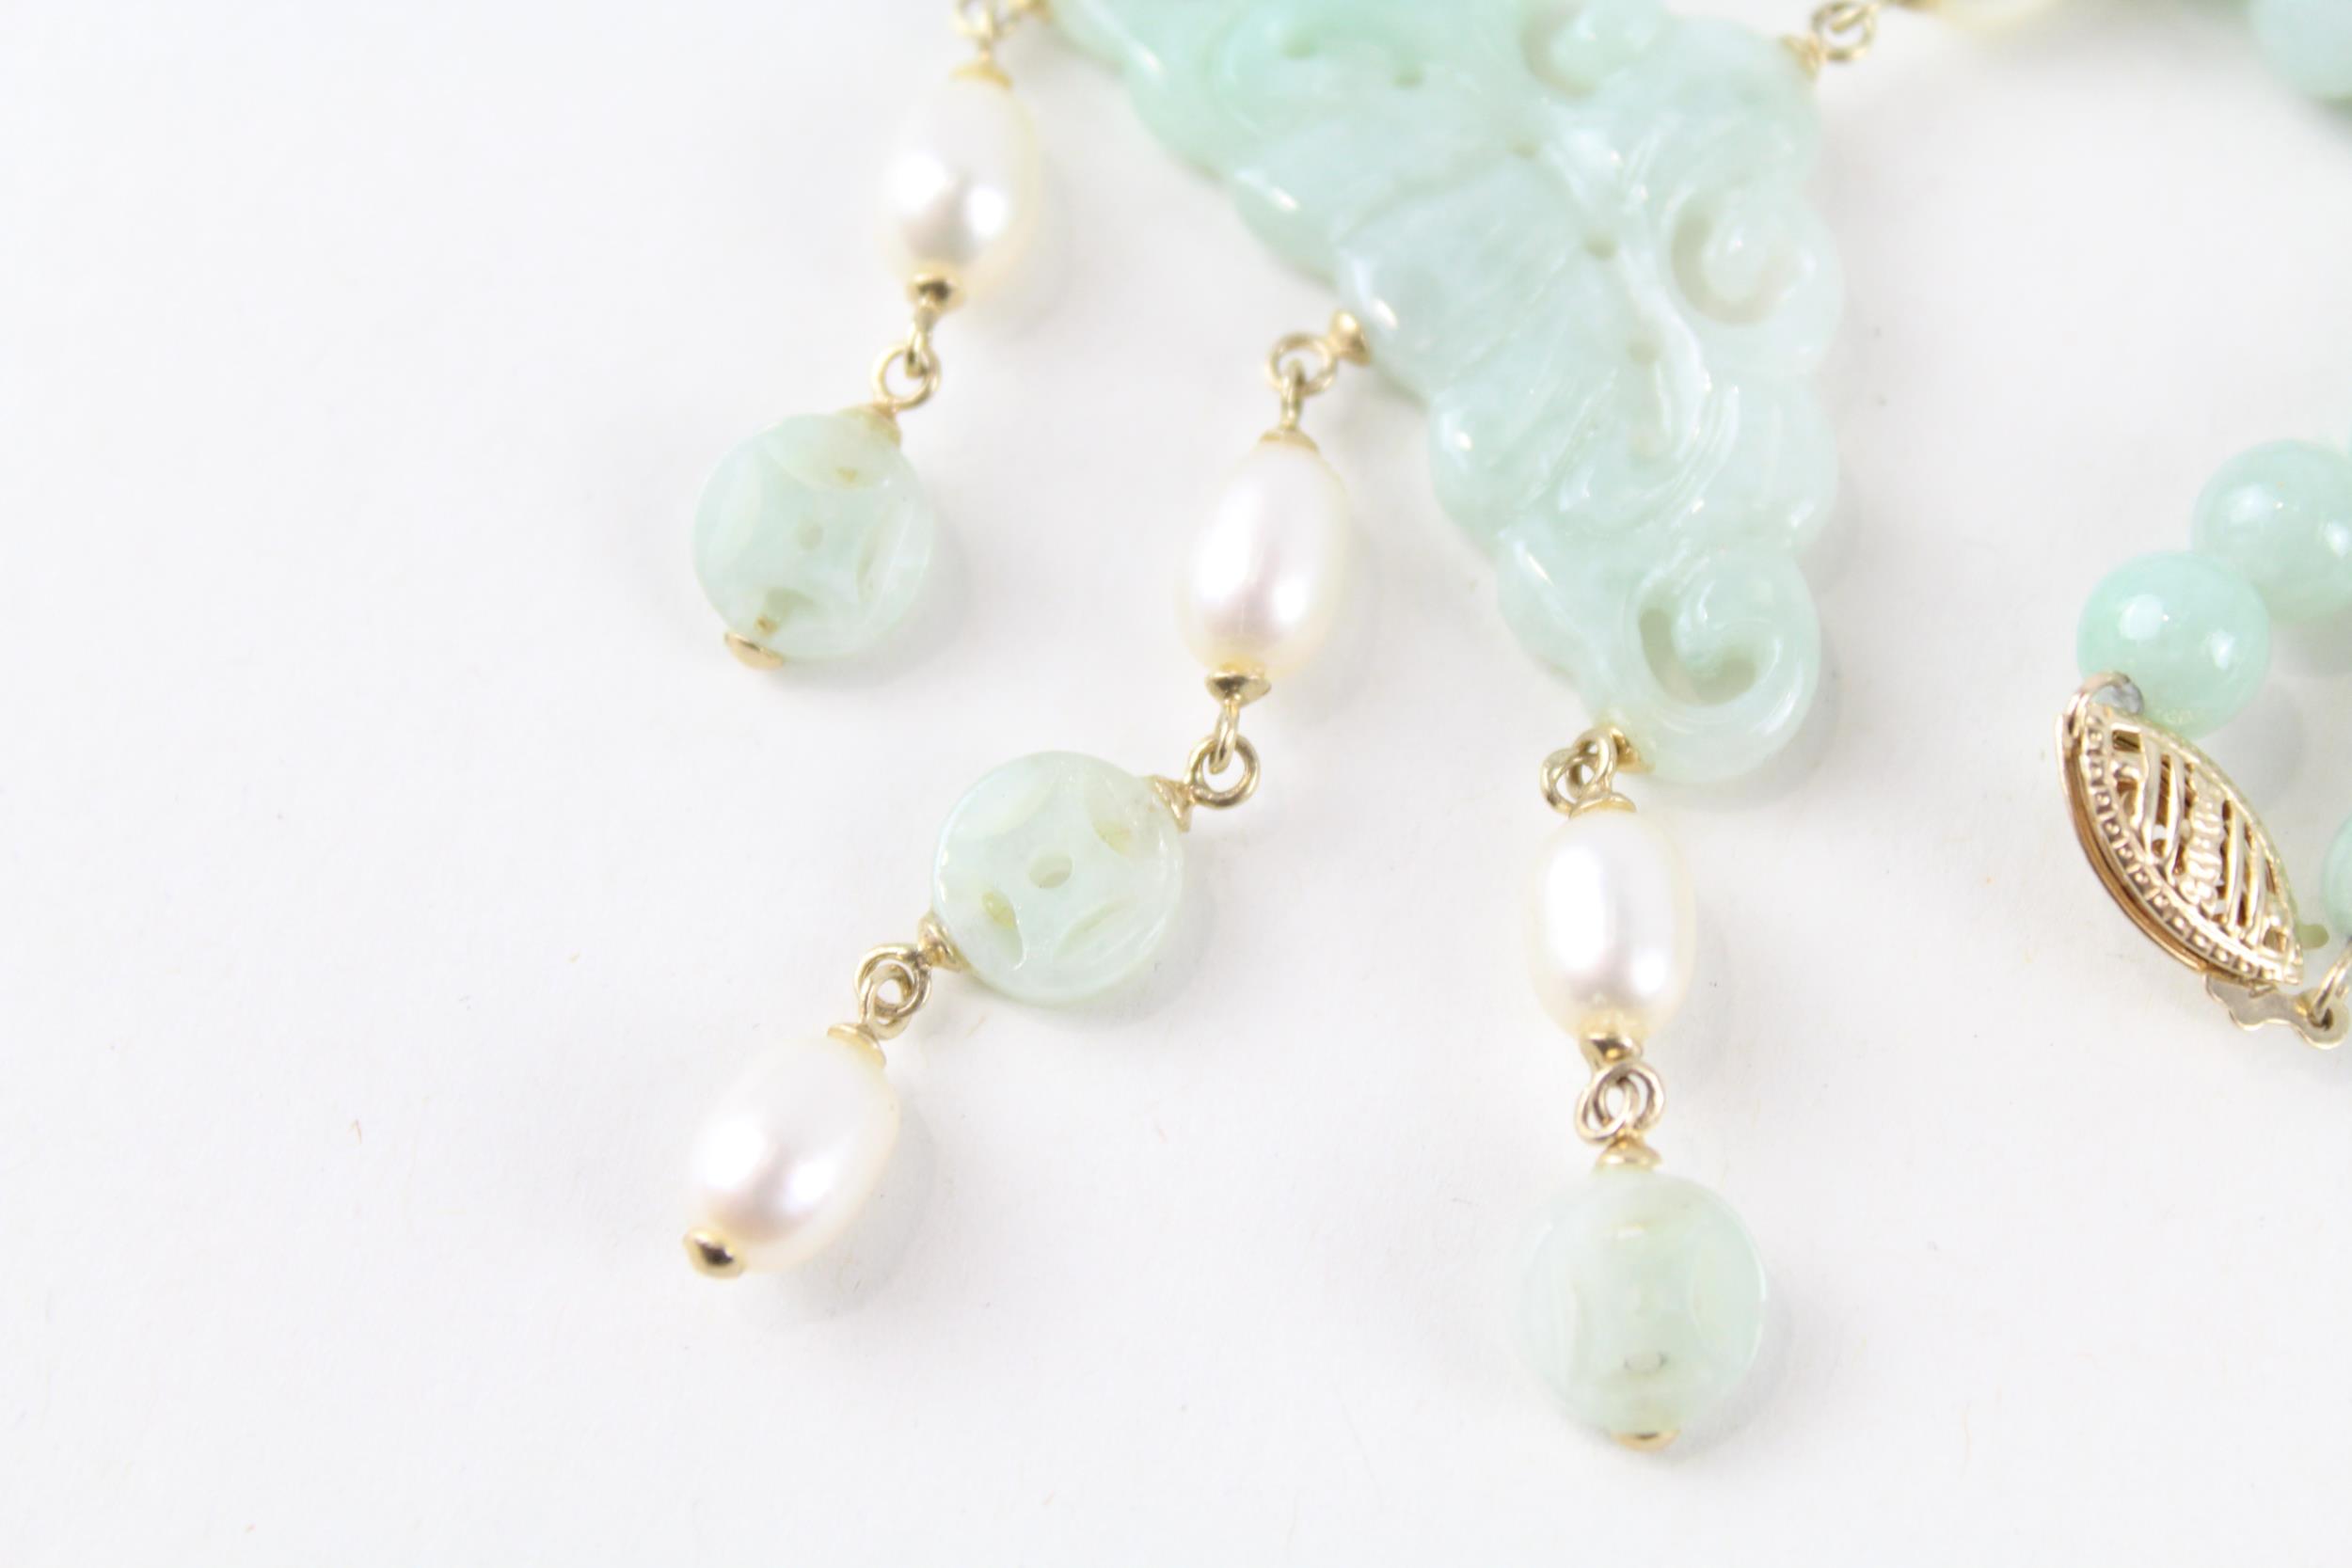 14ct gold carved jade & pearl cloud shaped drop necklace (31.6g) - Image 3 of 5